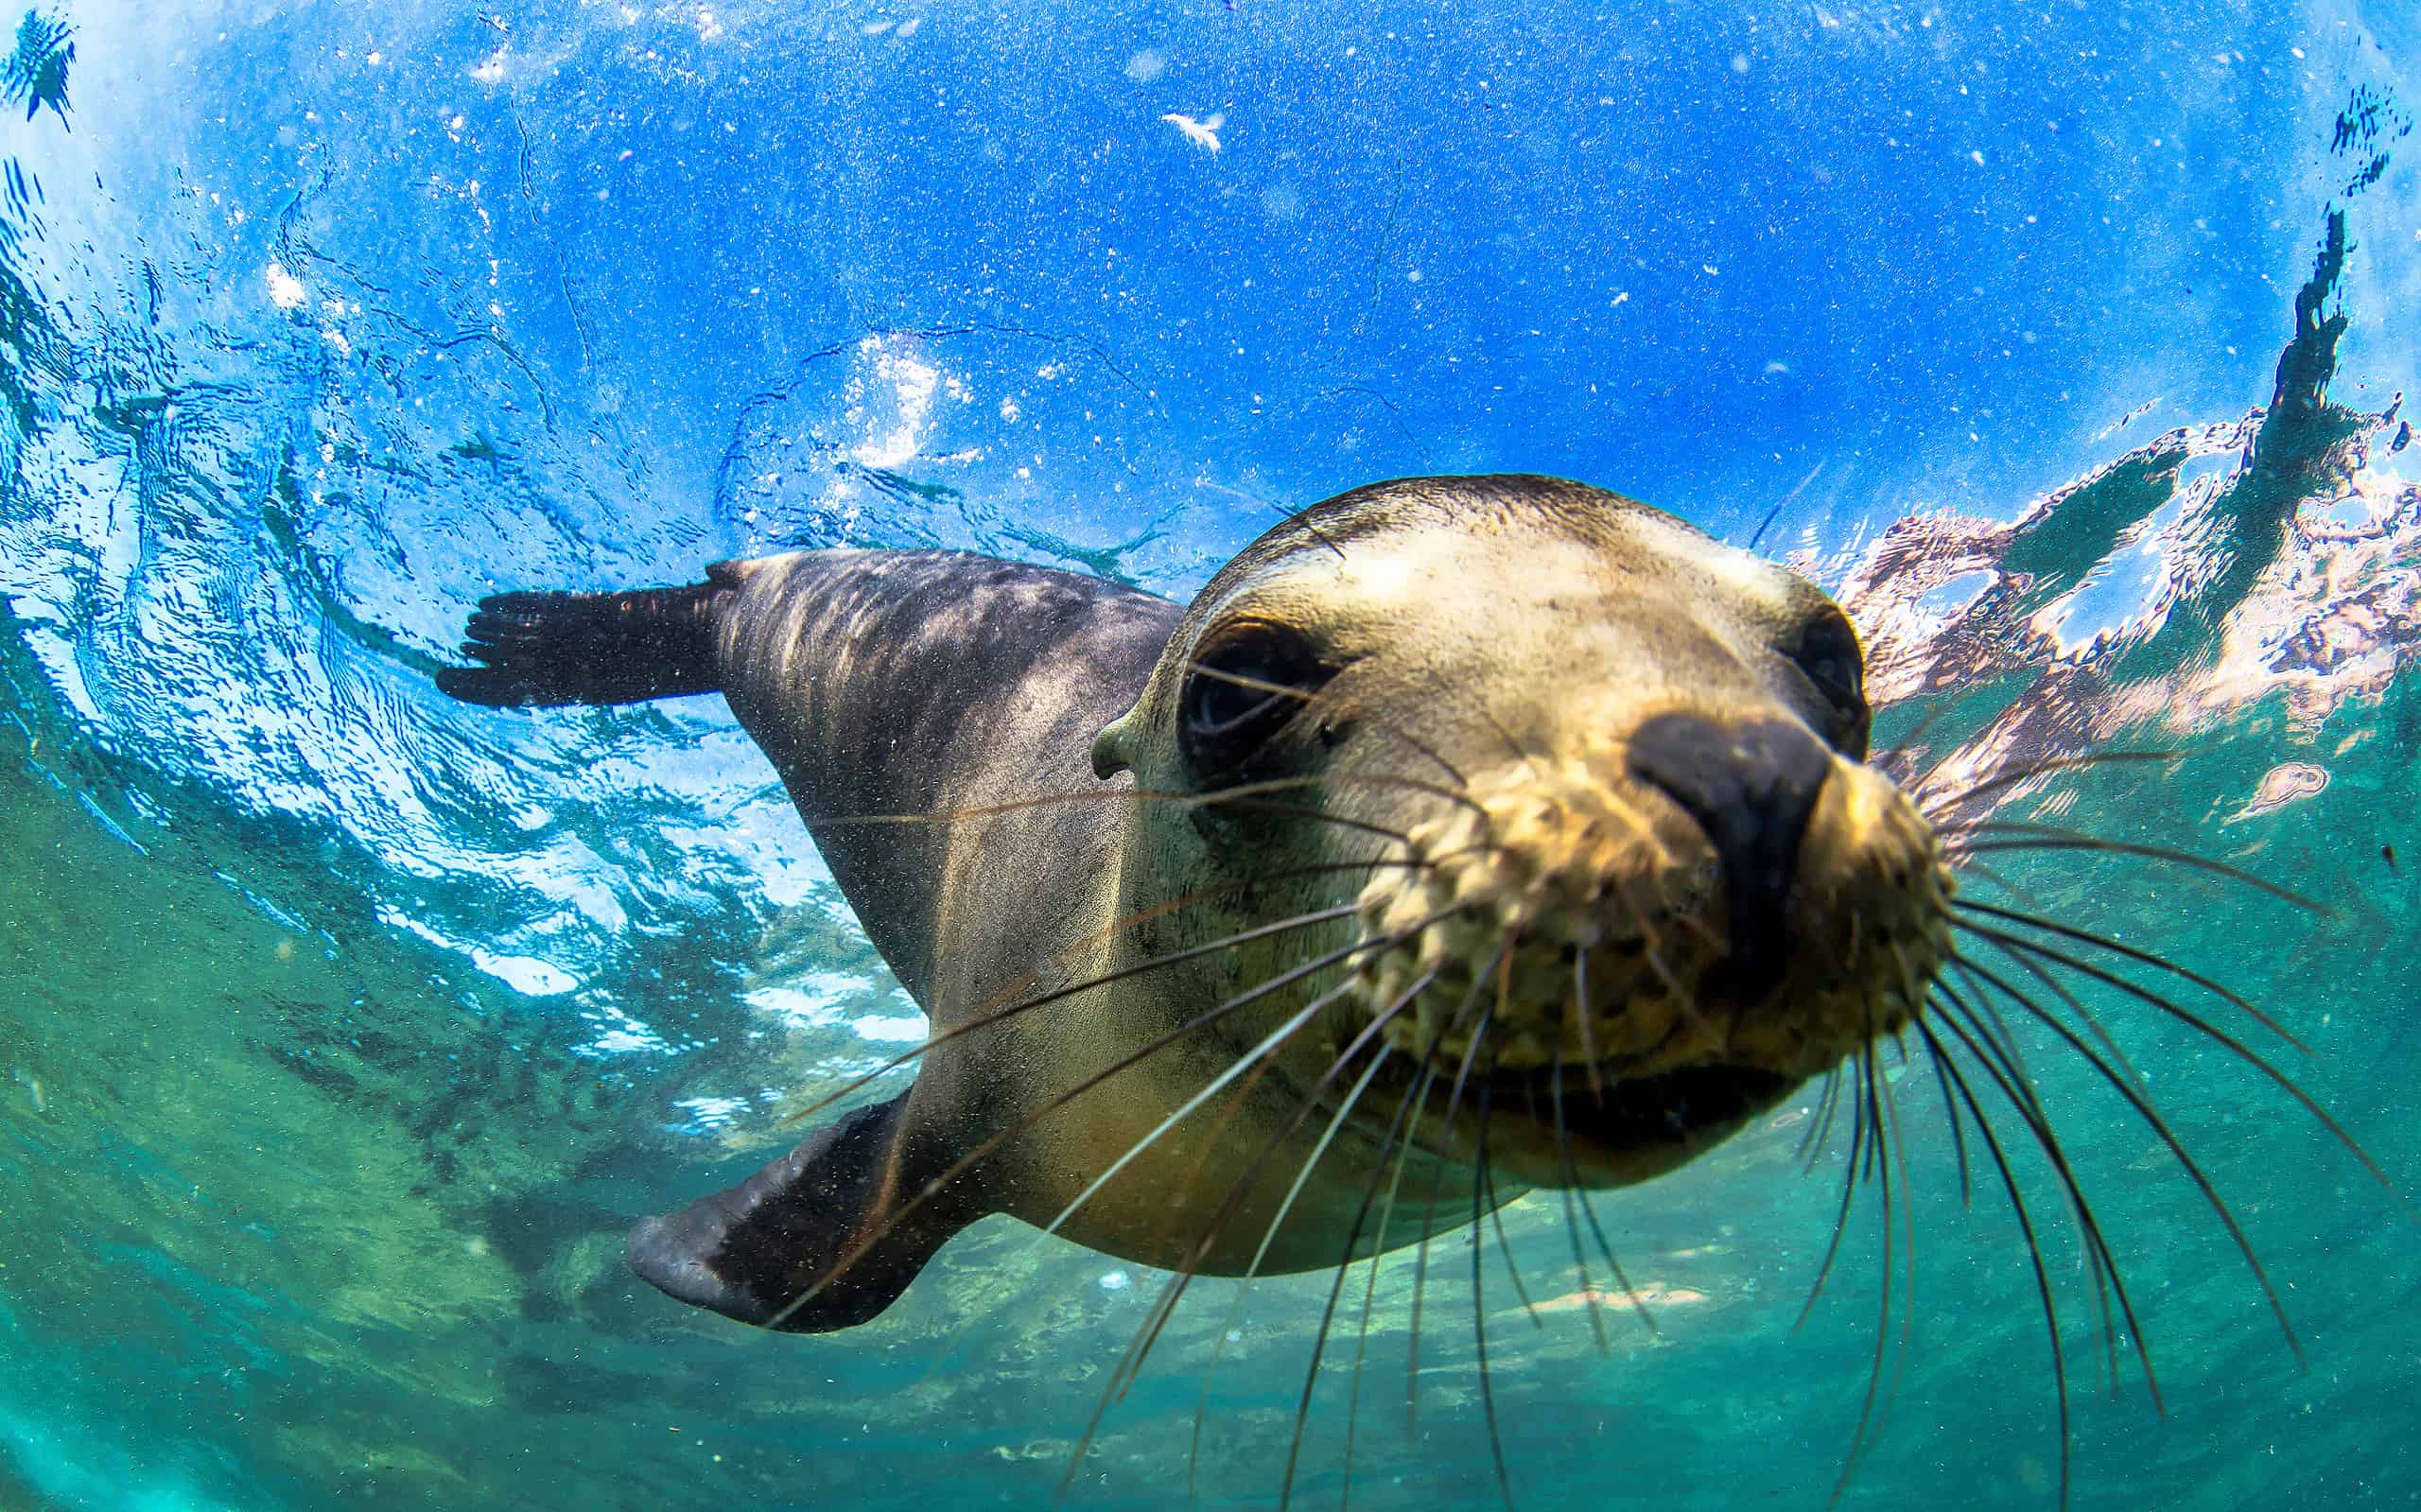 Galapagos fur seal : one of the fascinating animals of the Galapagos Islands\(Arctocephalus galapagoensis) swimming at camera in tropical underwaters. Lion seal in under water world. Observation of wildlife ocean. Scuba diving adventure in Ecuador coast